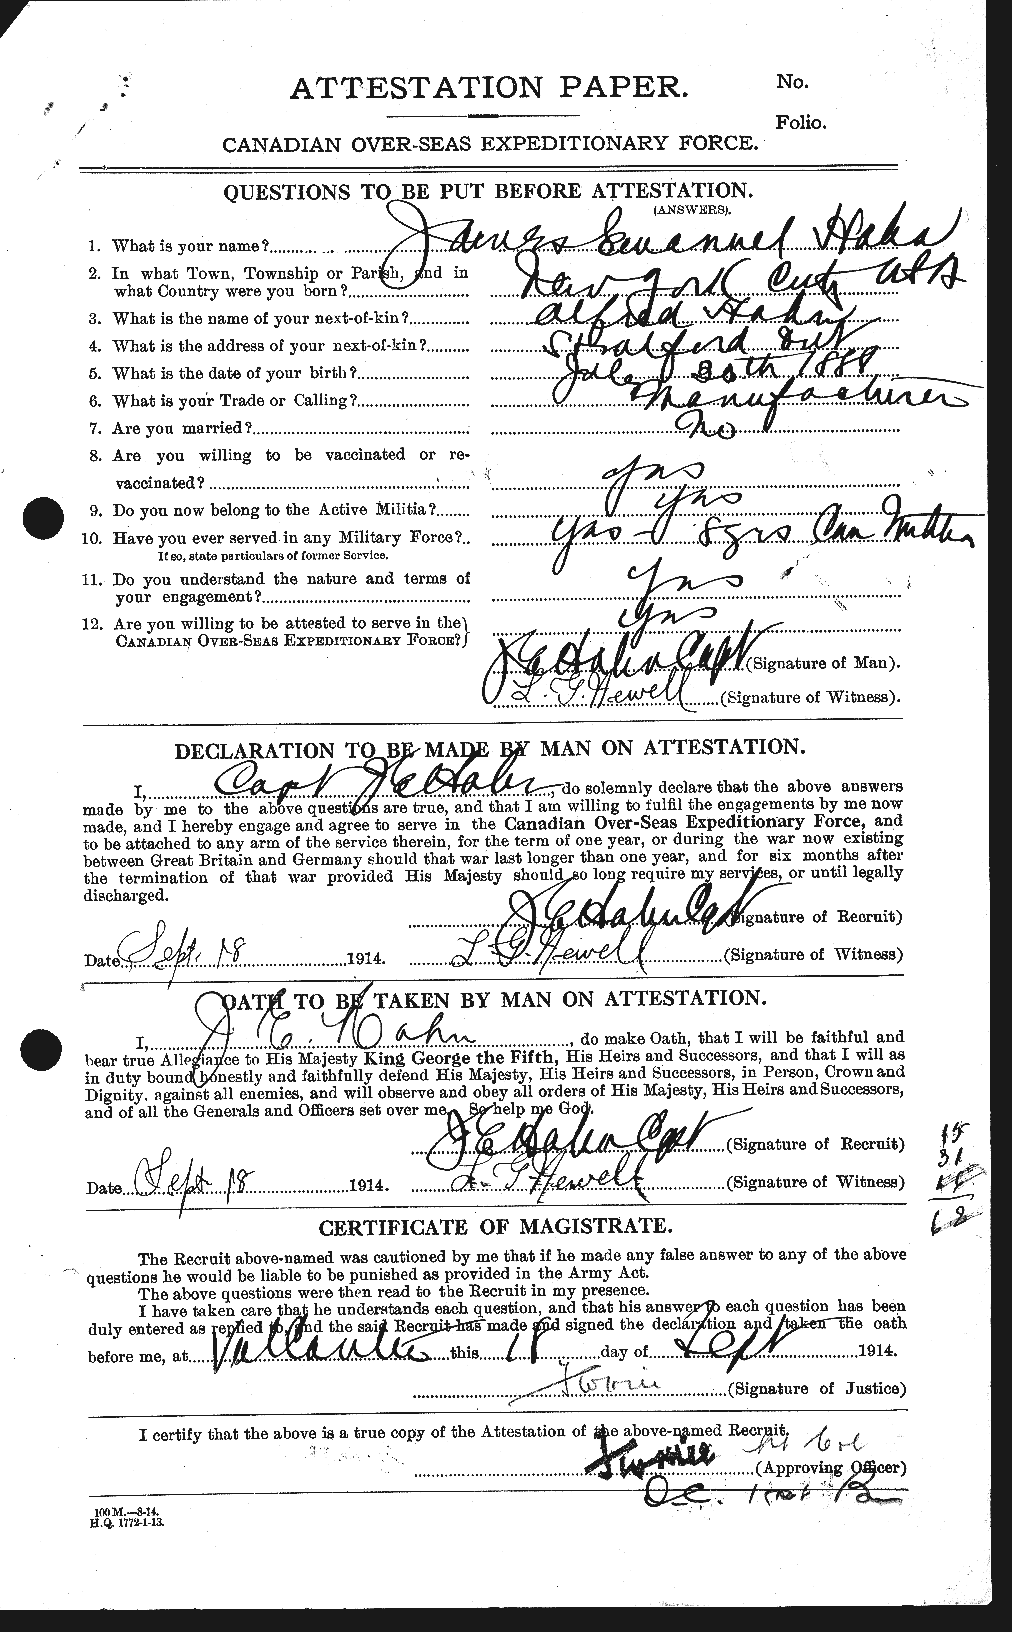 Personnel Records of the First World War - CEF 368945a